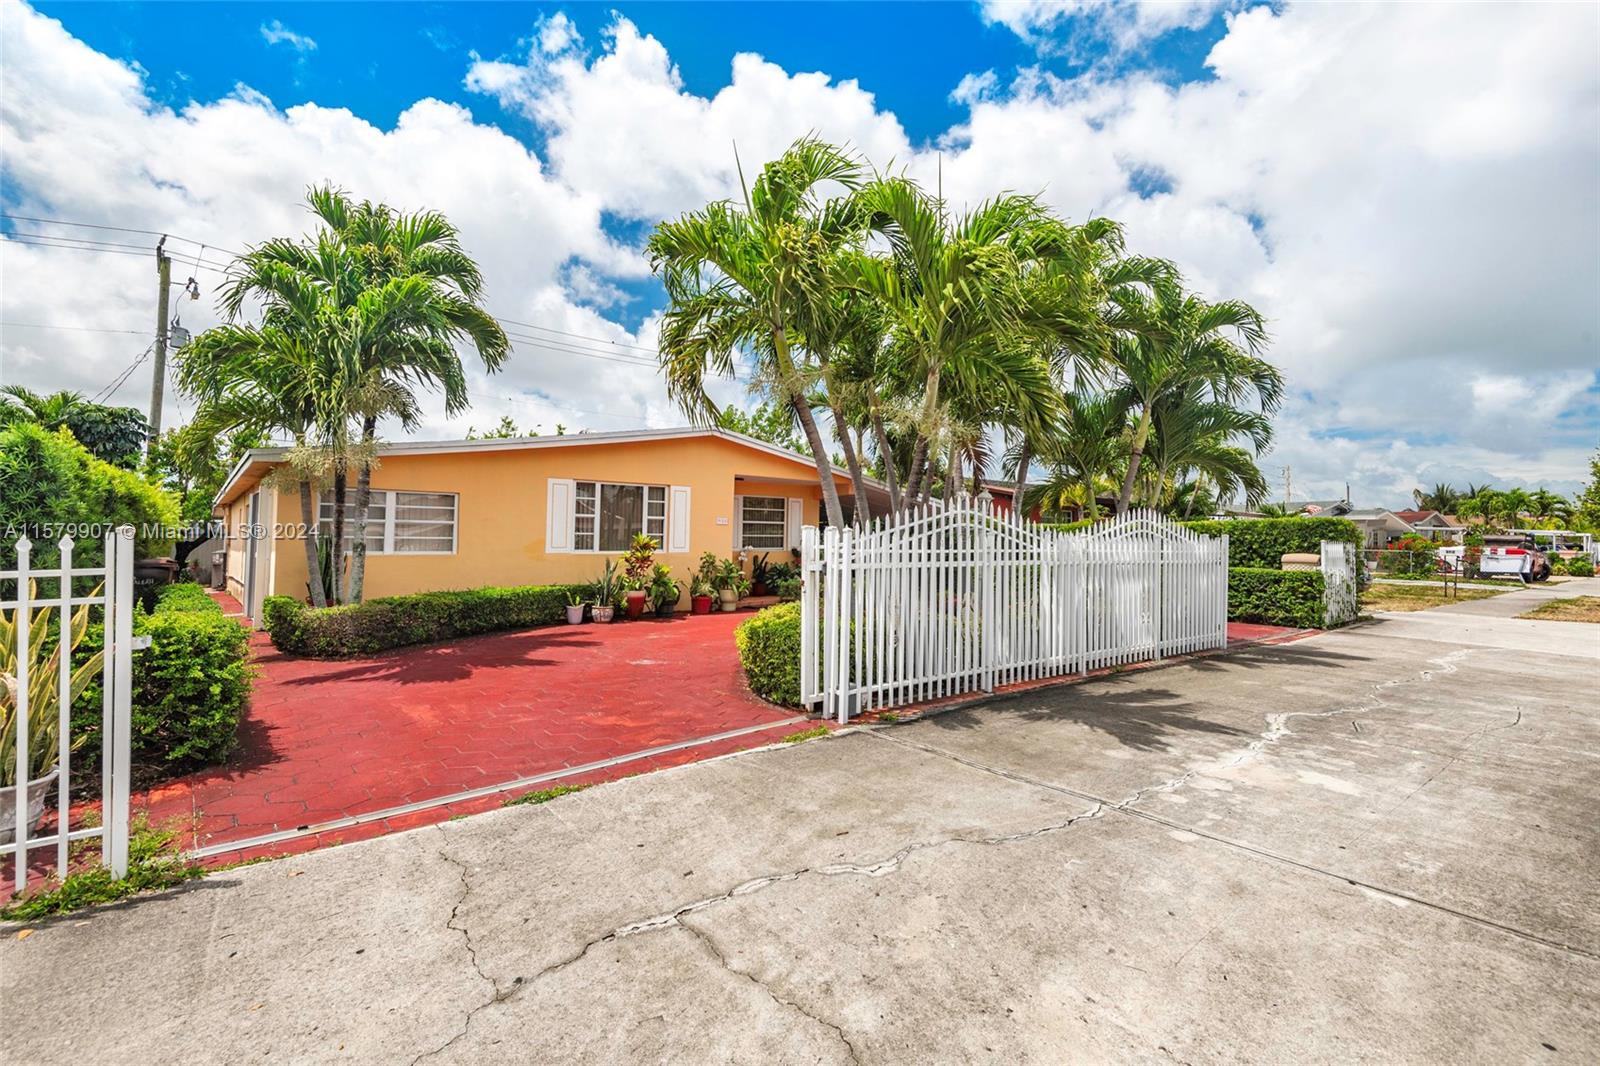 Property for Sale at 950 W 37th St St, Hialeah, Miami-Dade County, Florida - Bedrooms: 4 
Bathrooms: 3  - $650,000